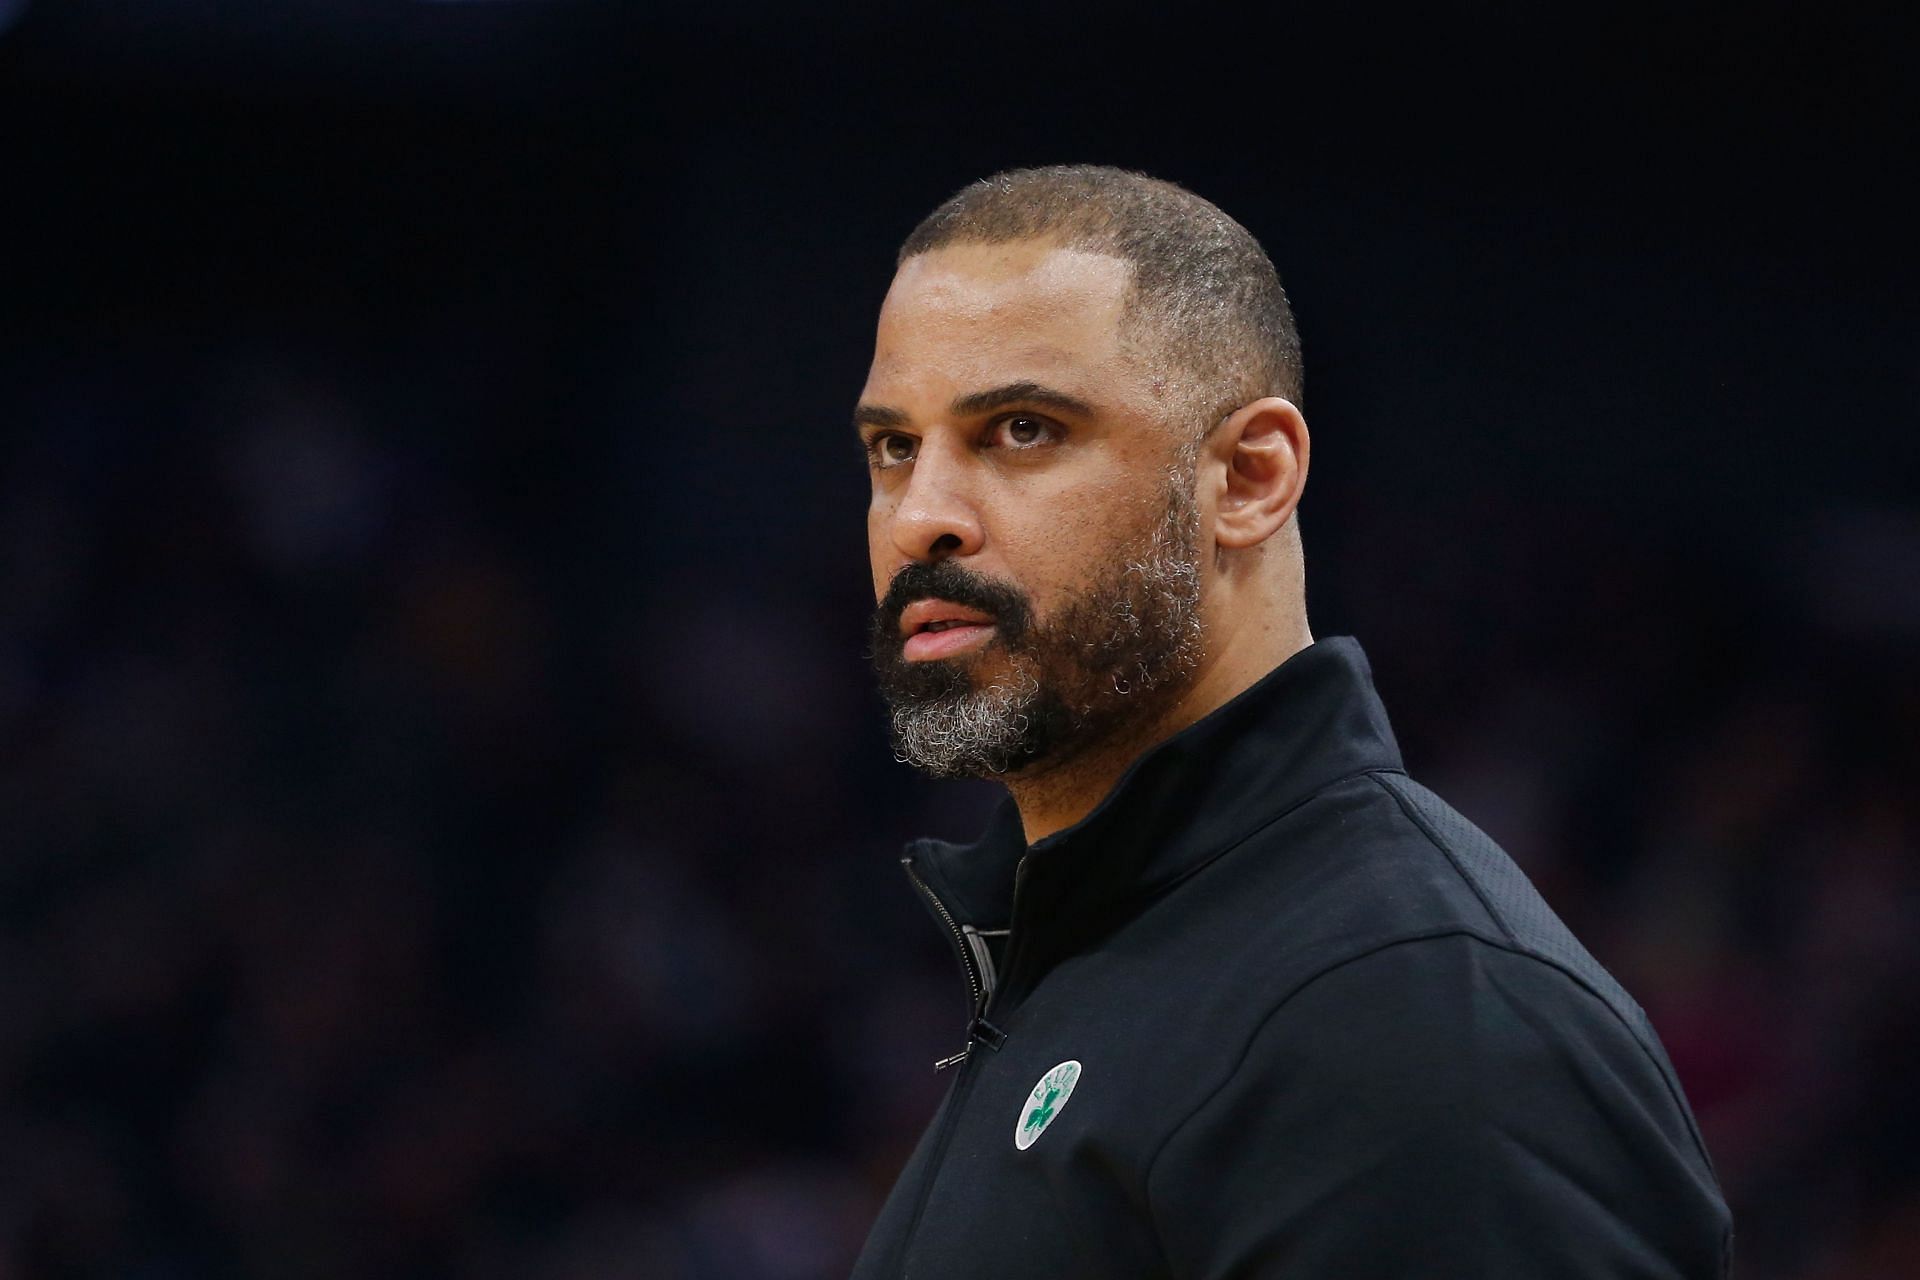 Head coach Ime Udoka of the Boston Celtics looks on during the game against the Golden State Warriors at Chase Center on March 16, 2022 in San Francisco, California.